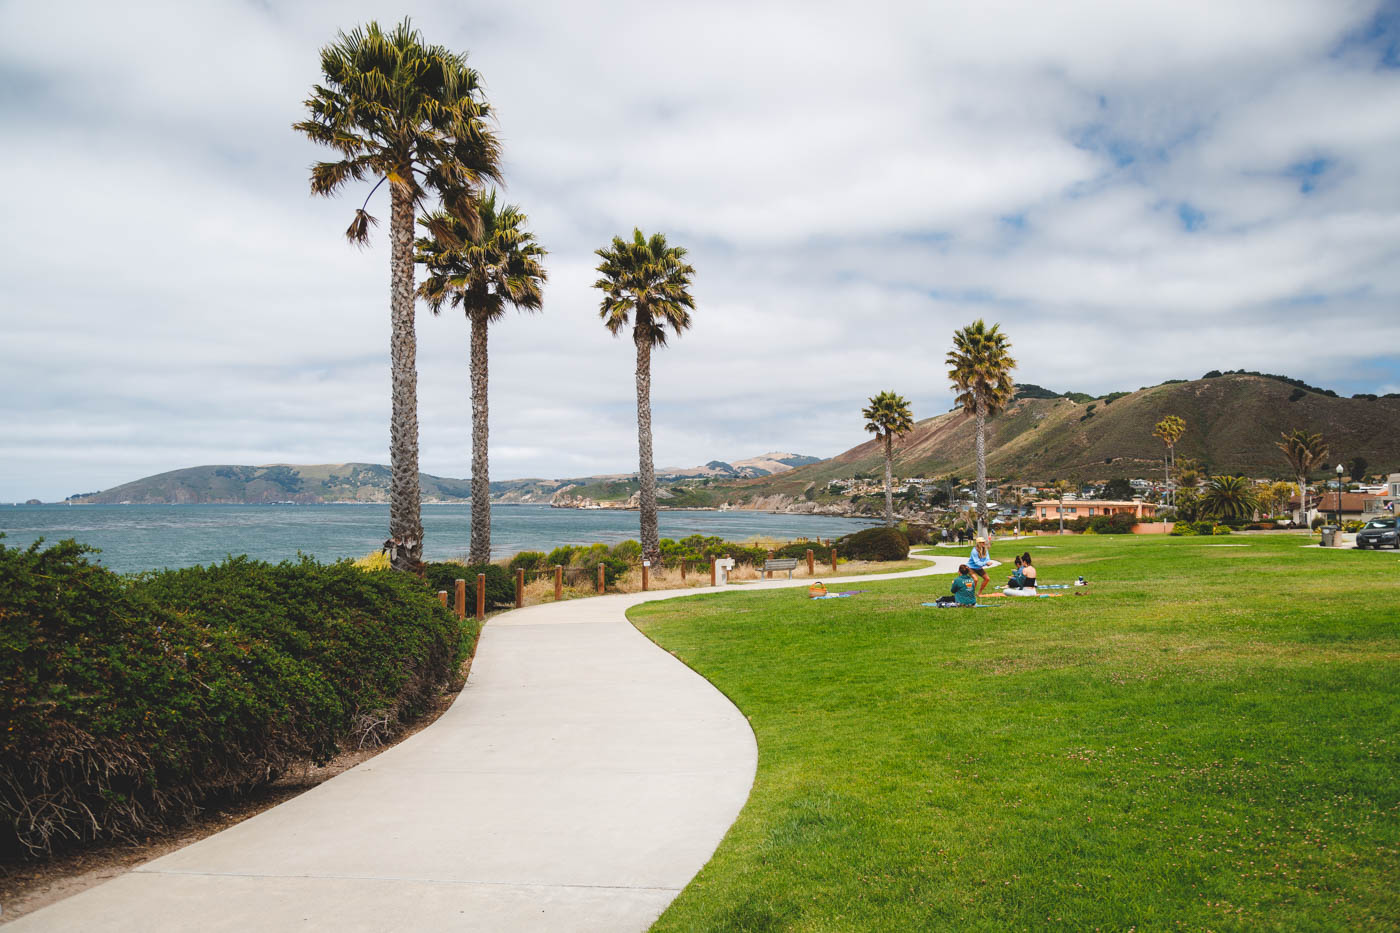 A pathway snaking down the coastline of South Palisades Park with a well groomed grassy area and palm trees either side.